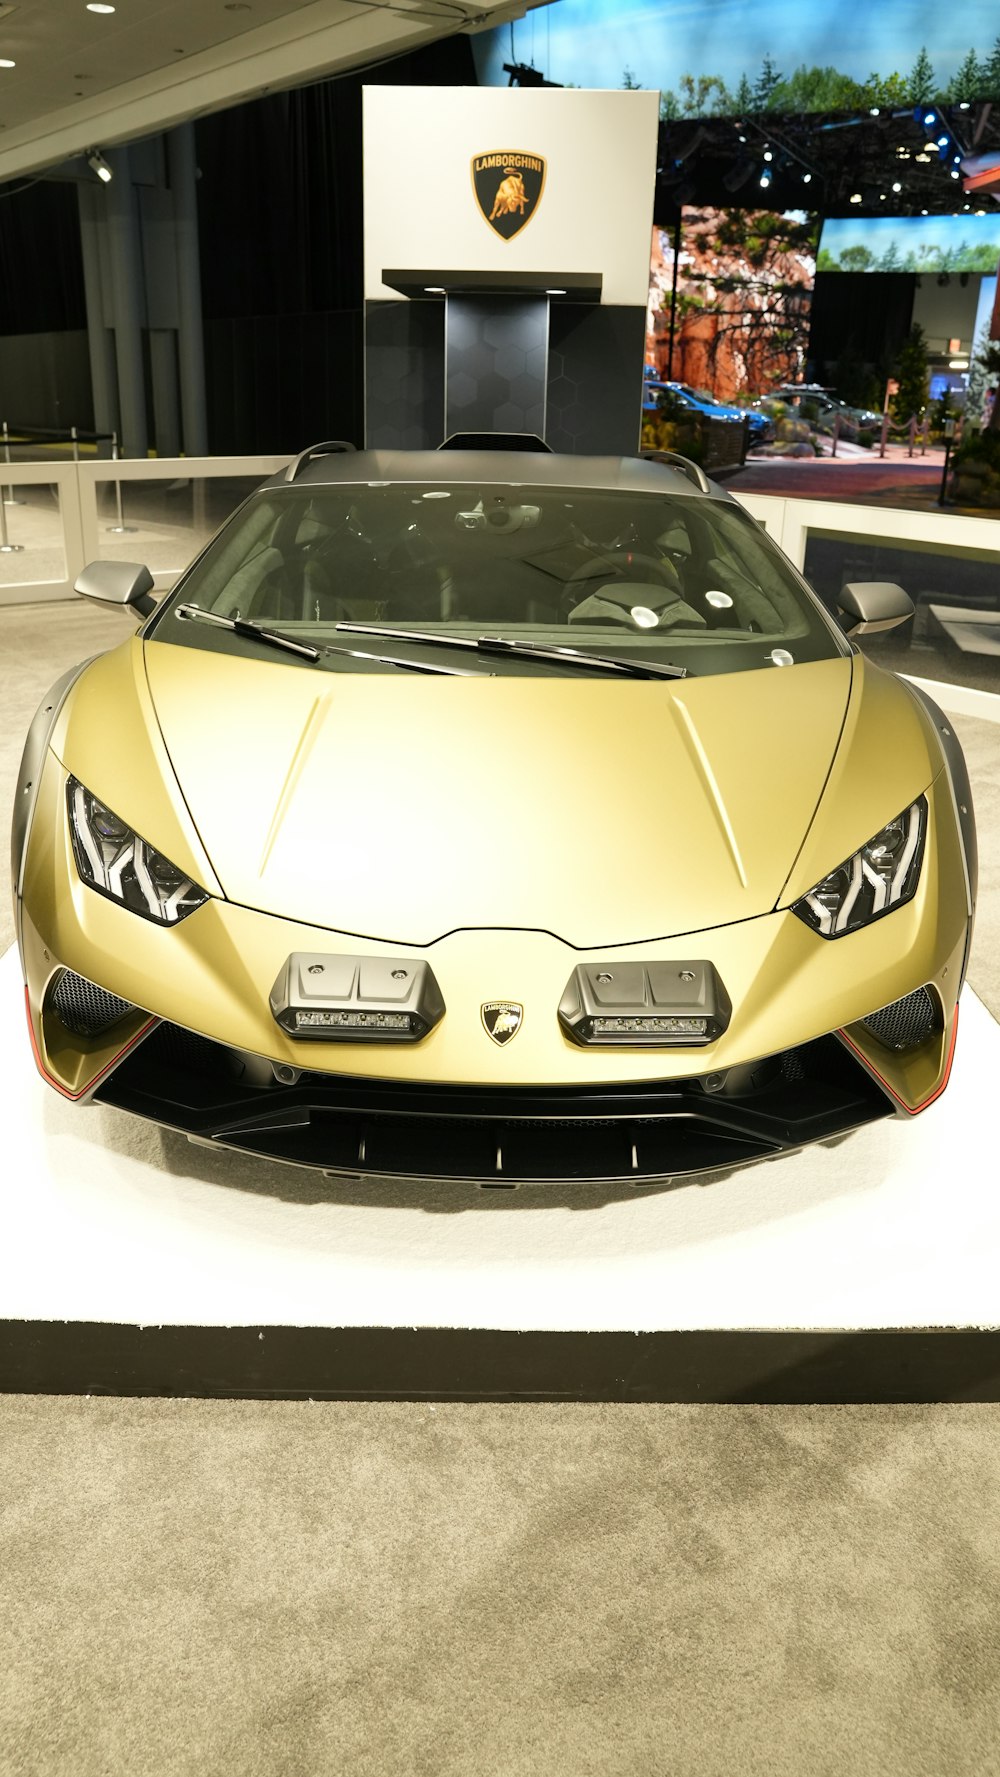 a gold colored sports car on display at a car show